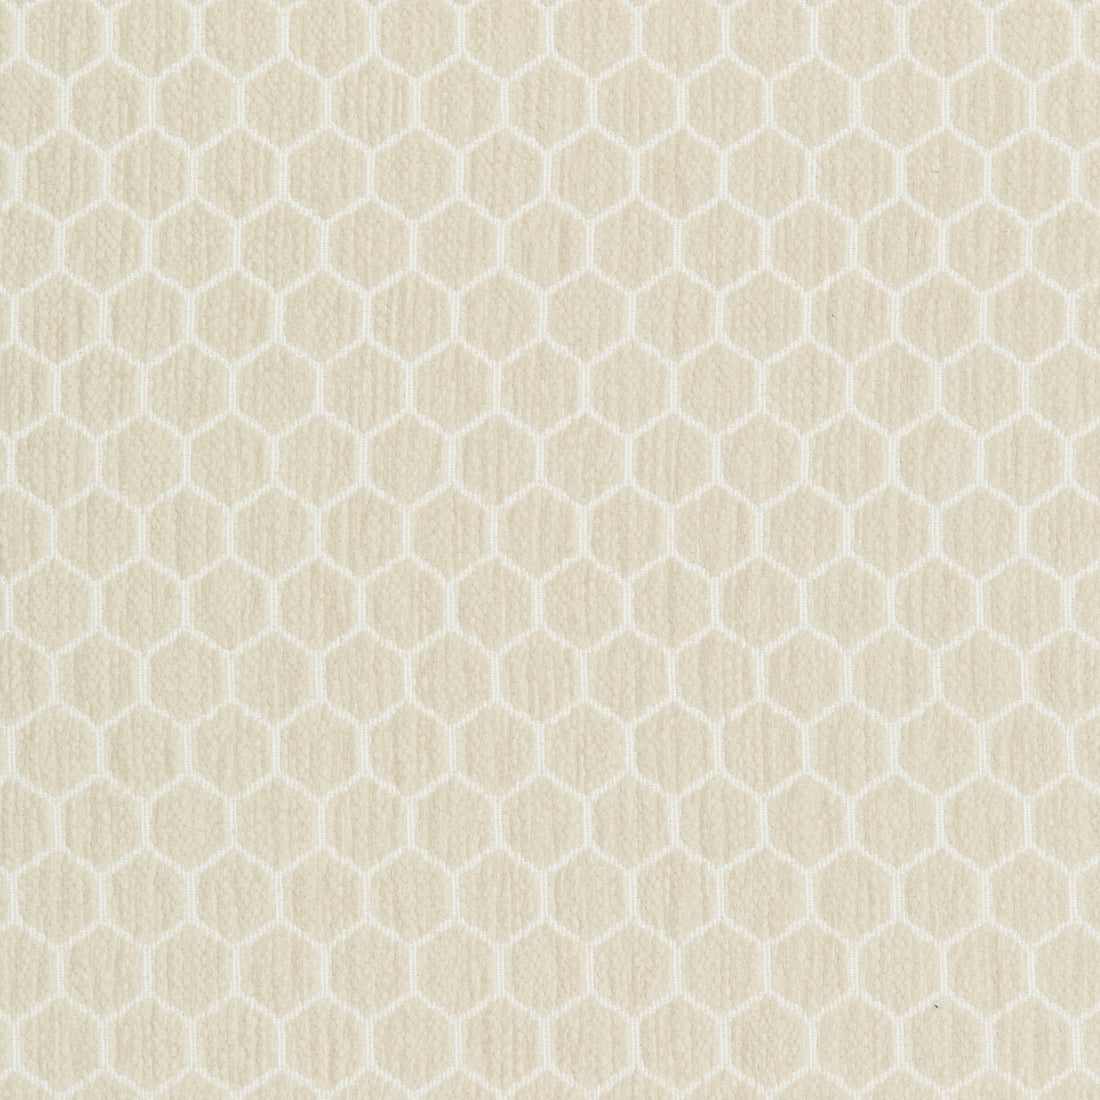 Kravet Design fabric in 36081-161 color - pattern 36081.161.0 - by Kravet Design in the Inside Out Performance Fabrics collection